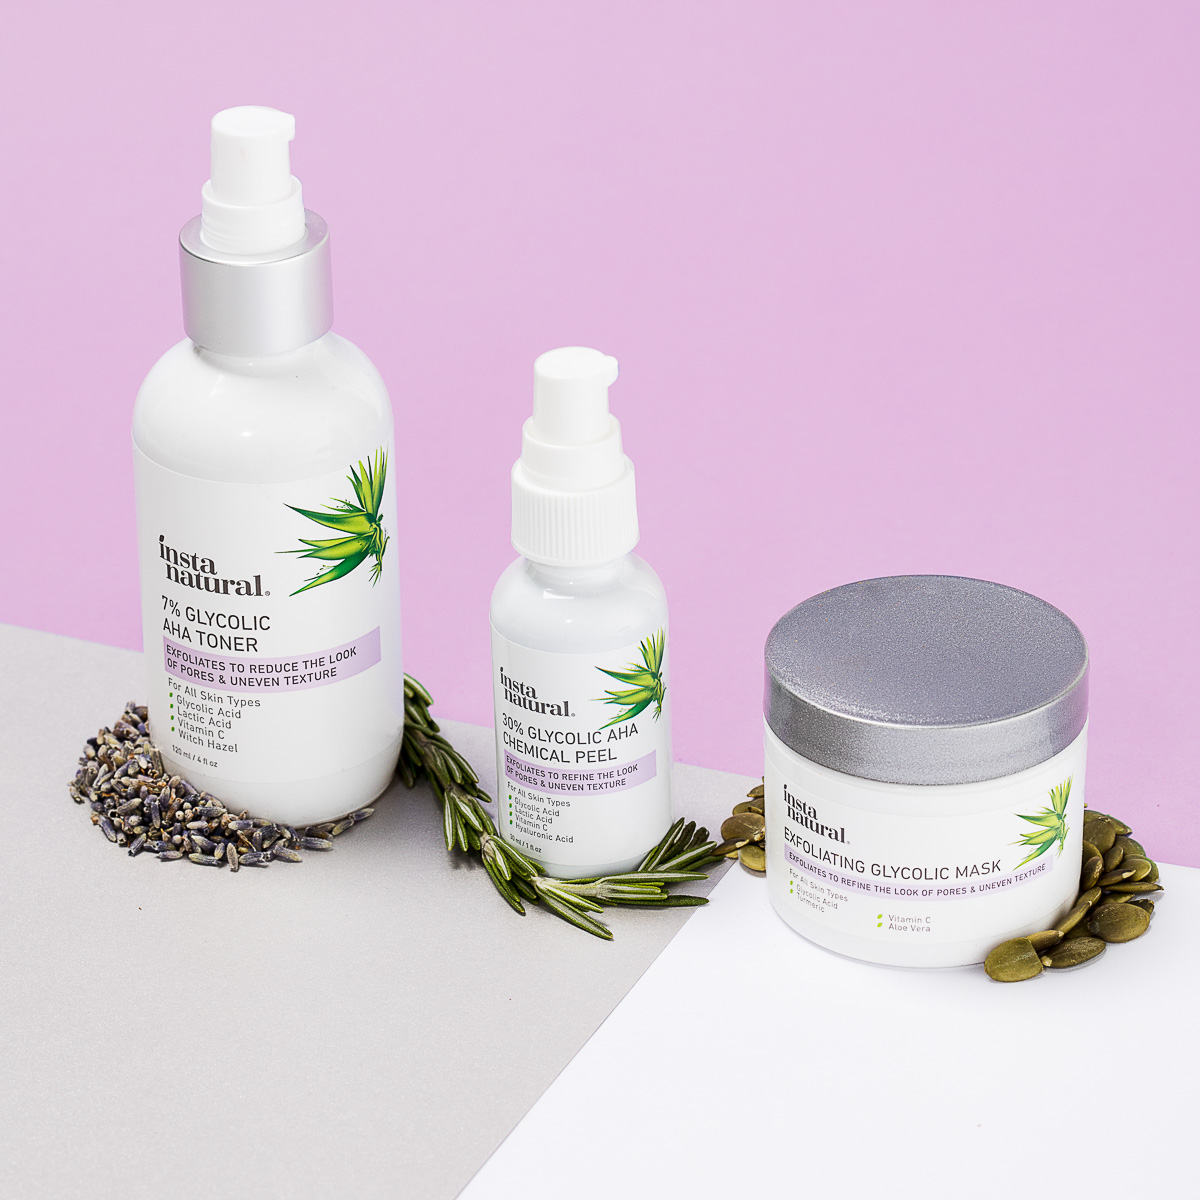 Skin care photography of Glycolic line for Instanatural, by product photographers at JAM Creative